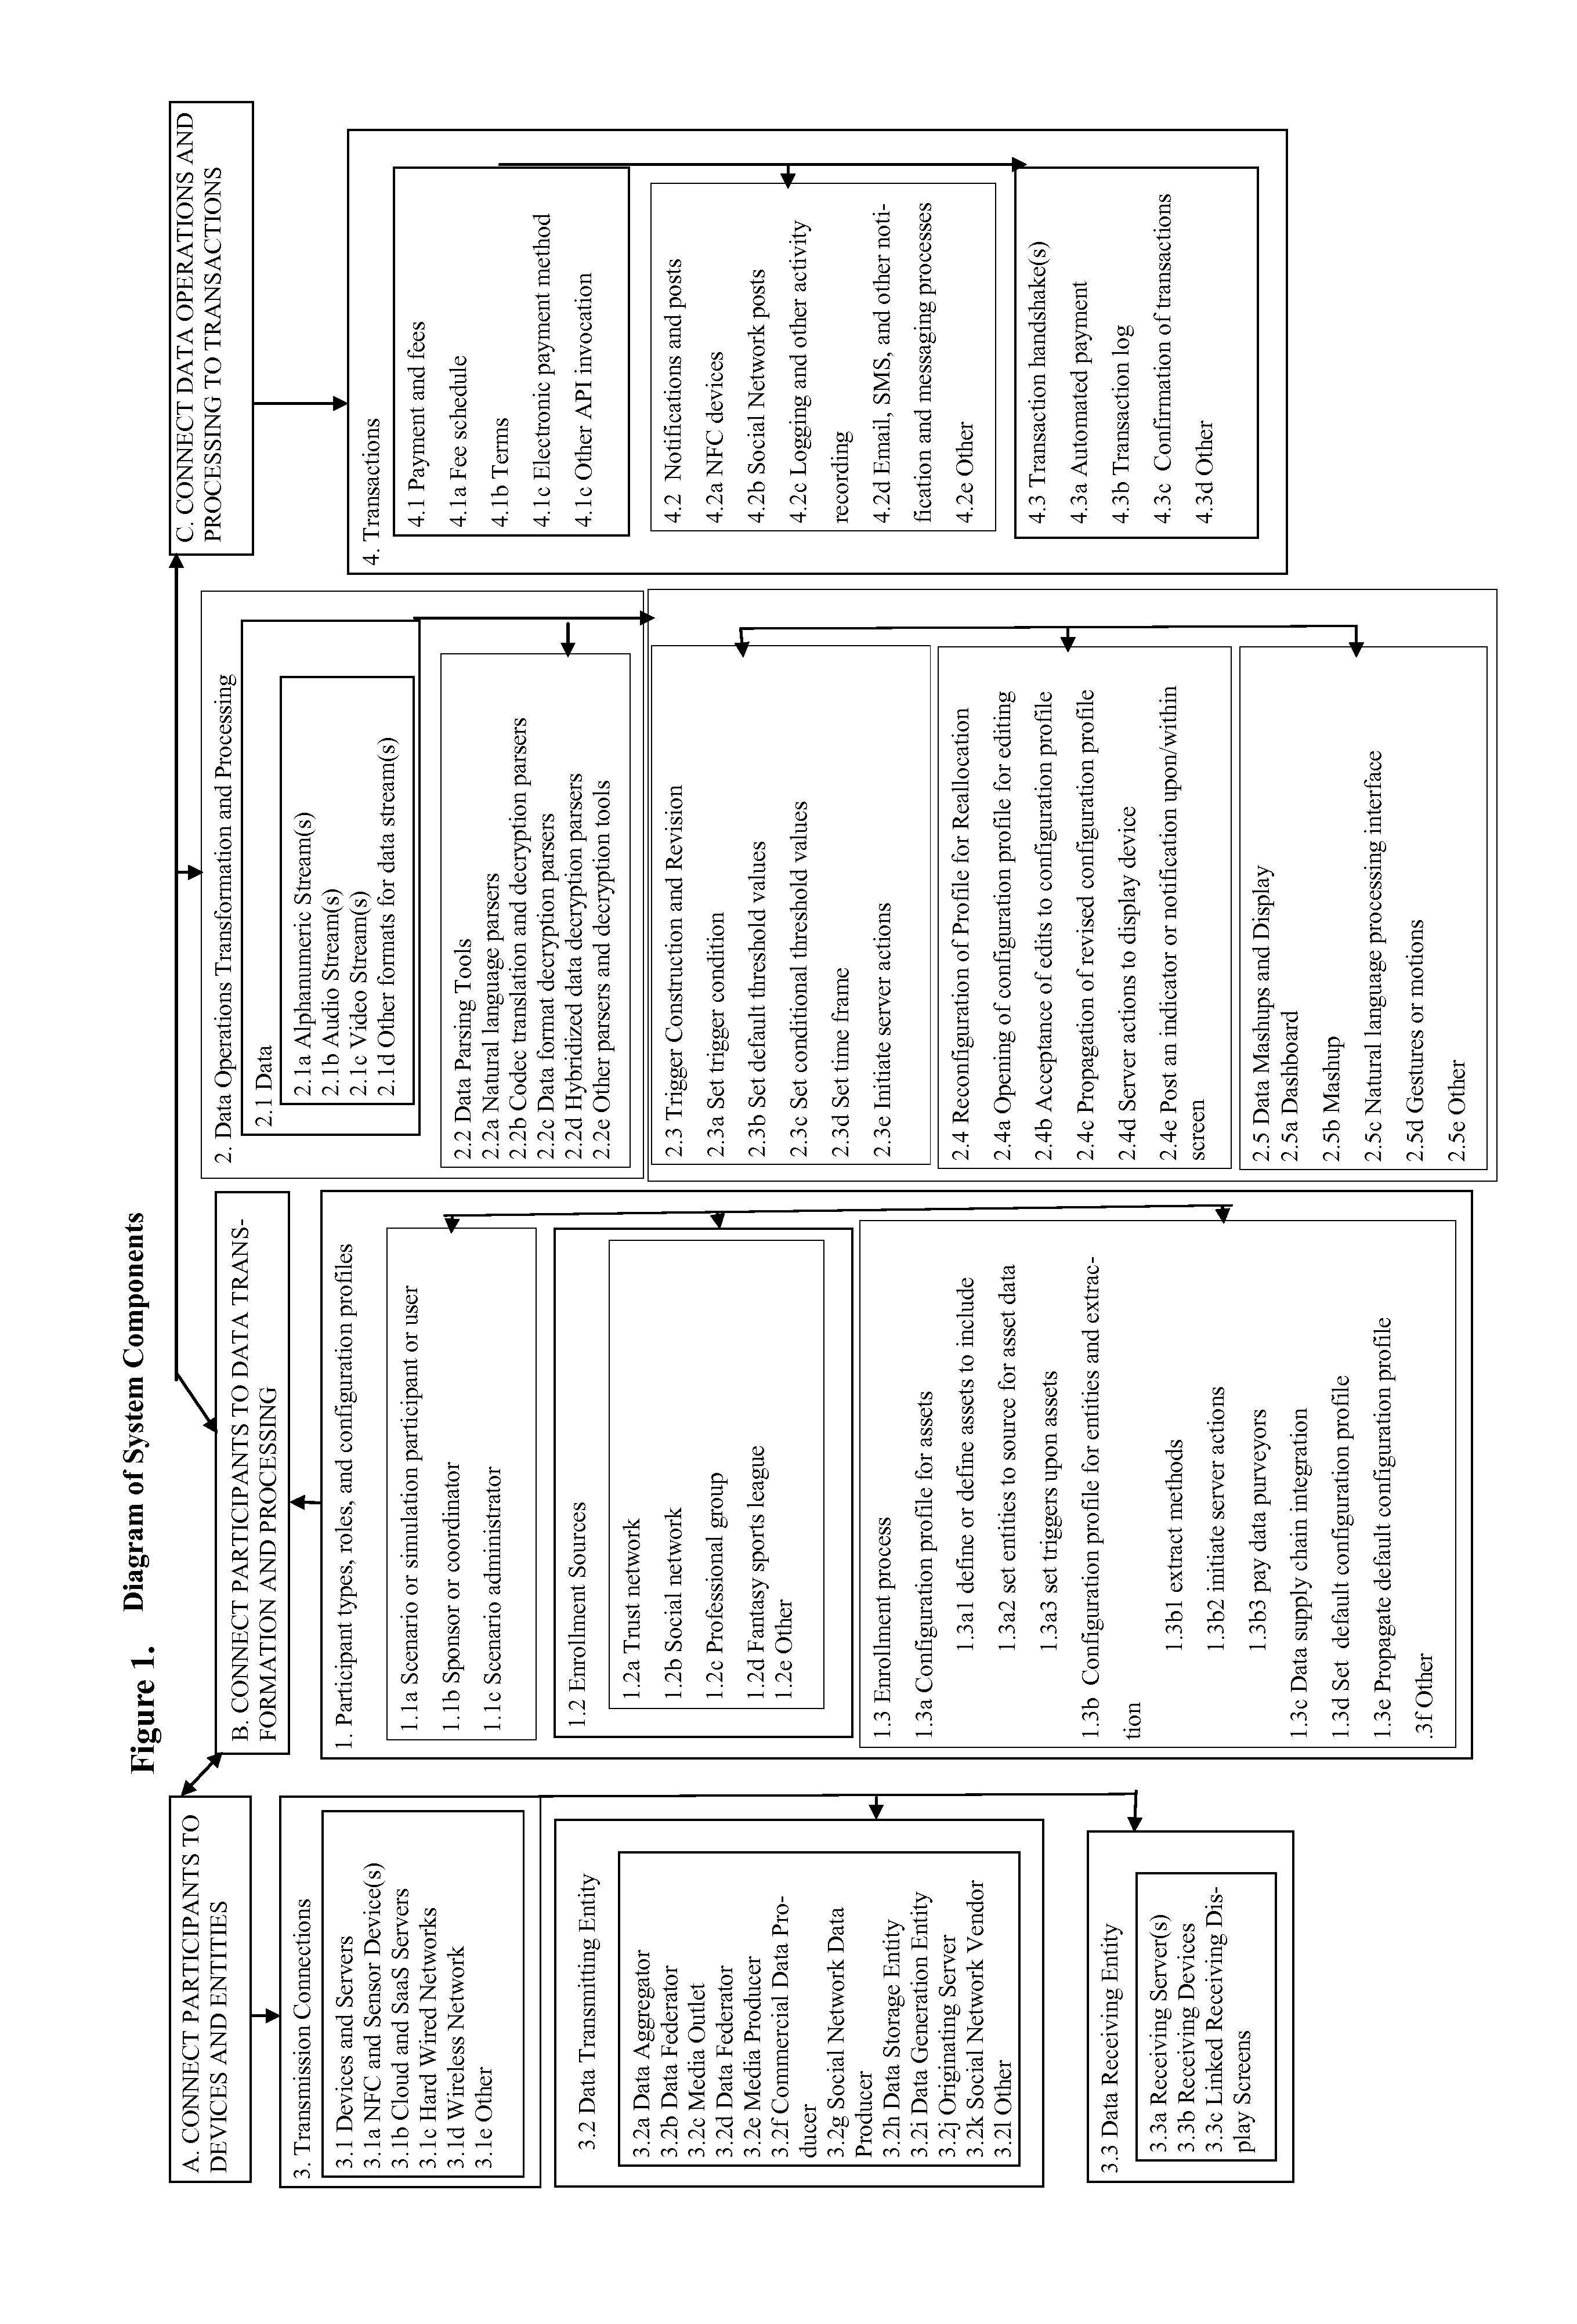 System and method for processing real time display of changes to data triggered by changes in a data supply chain